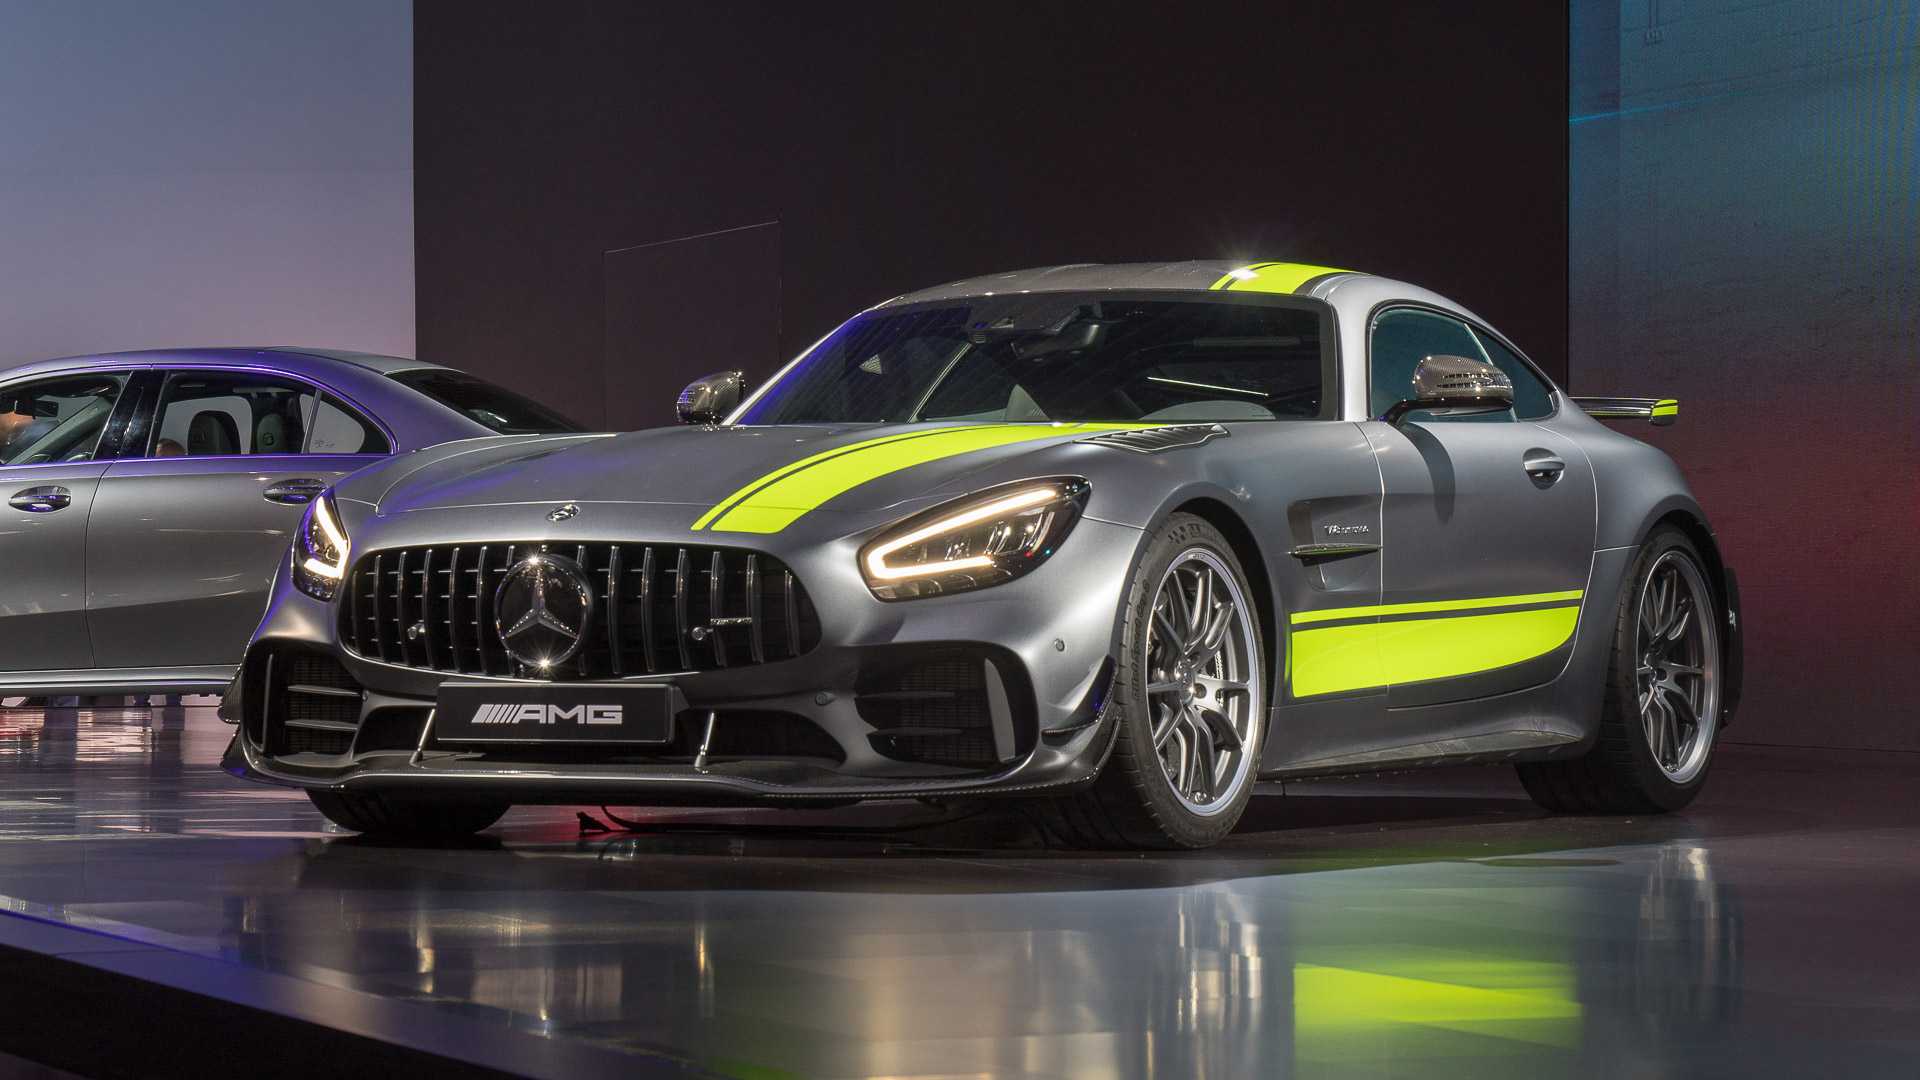 See The $200K Mercedes AMG GT R Pro Lap The 'Ring In 7:06 Minutes